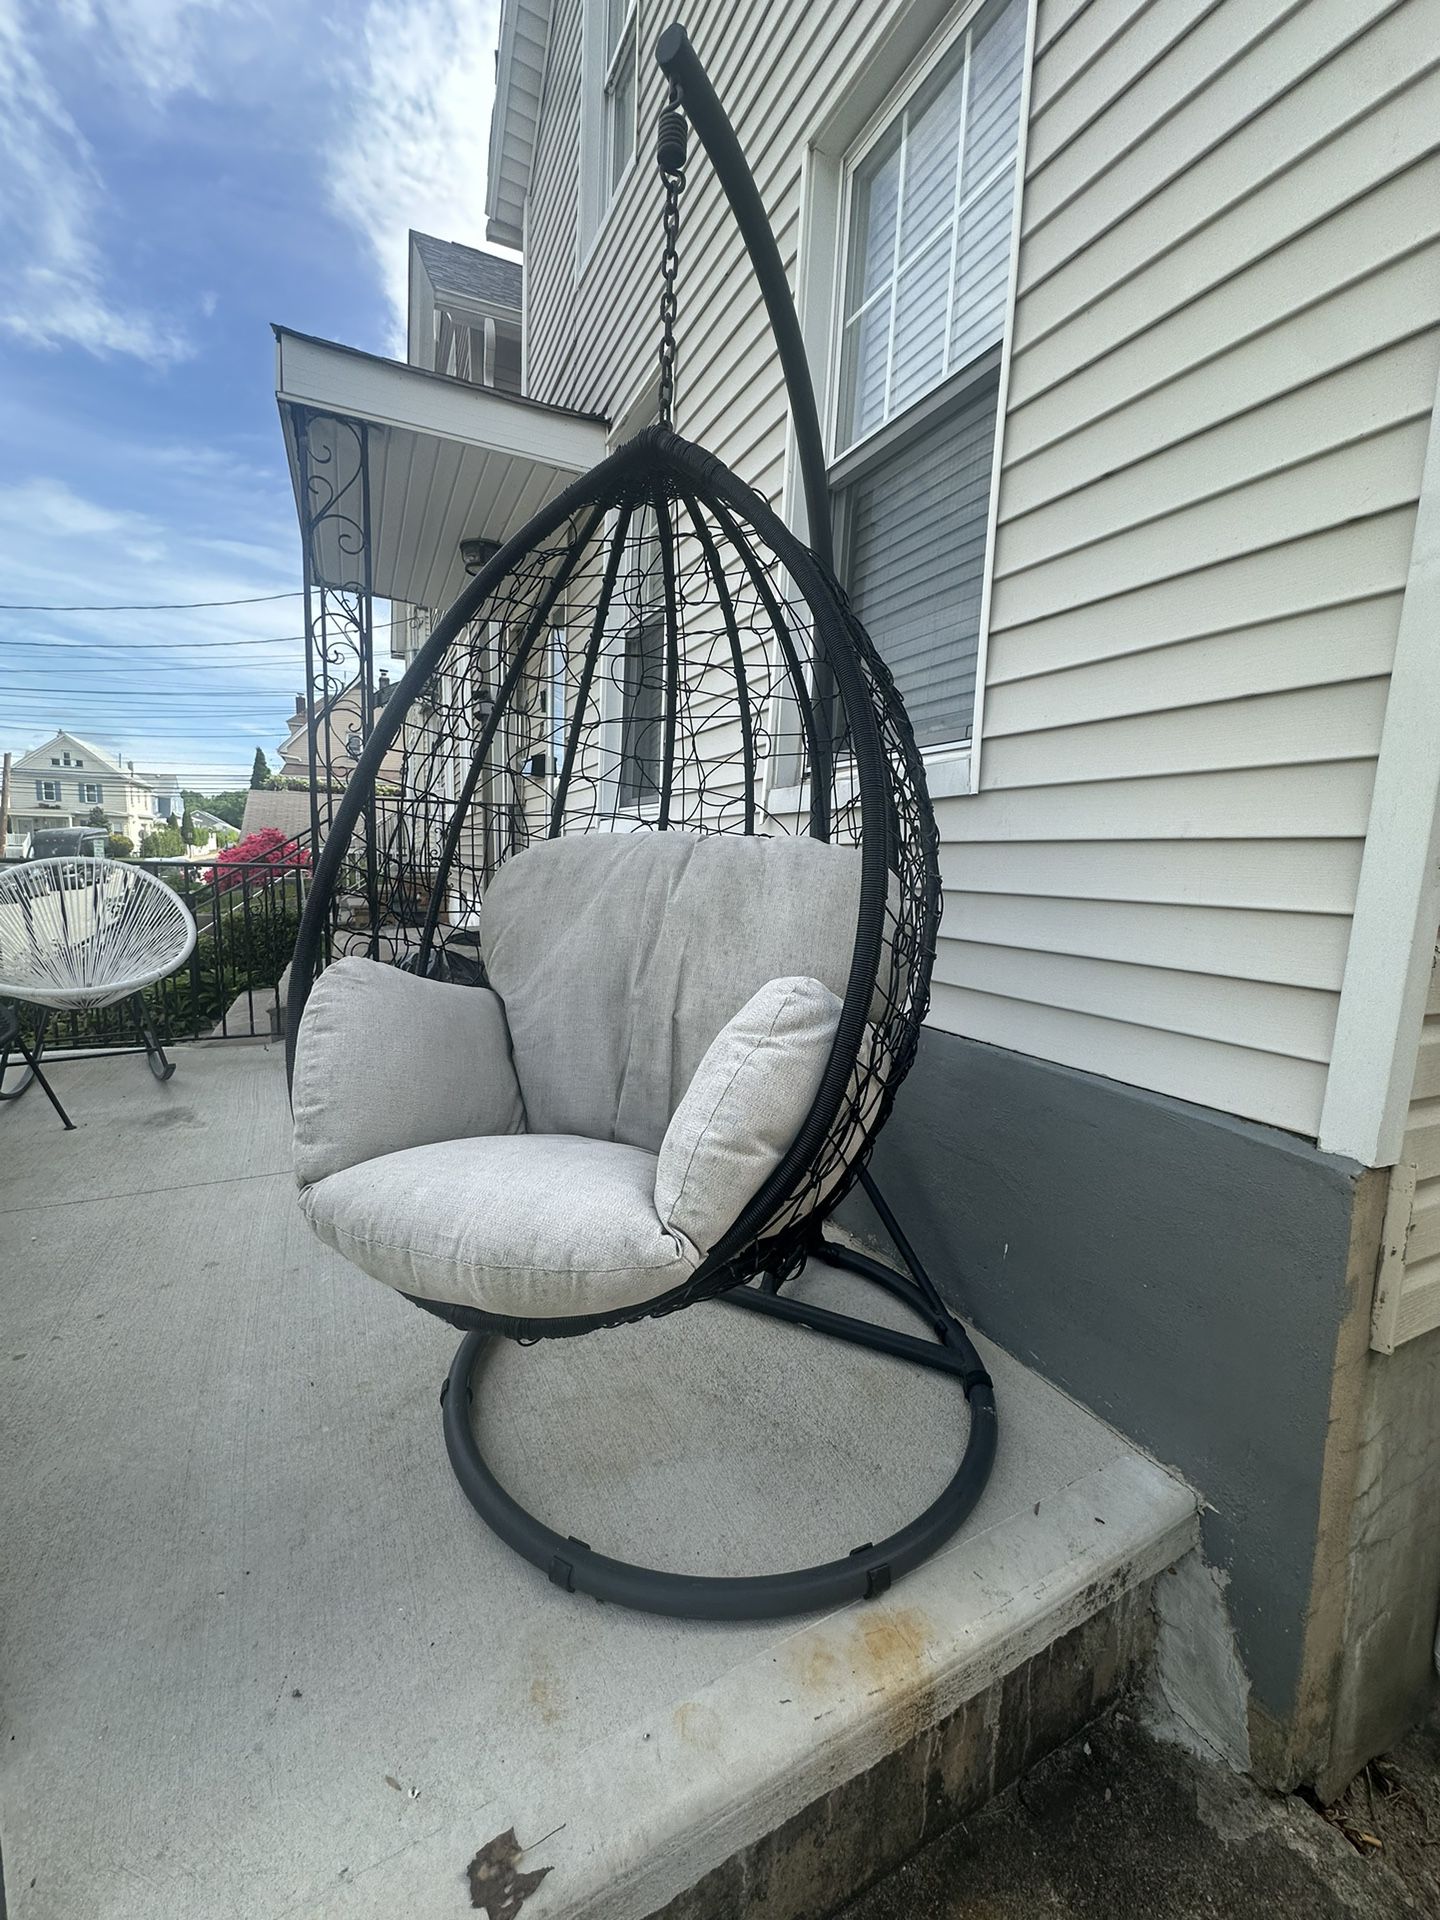 Hanging Egg chair Outdoor